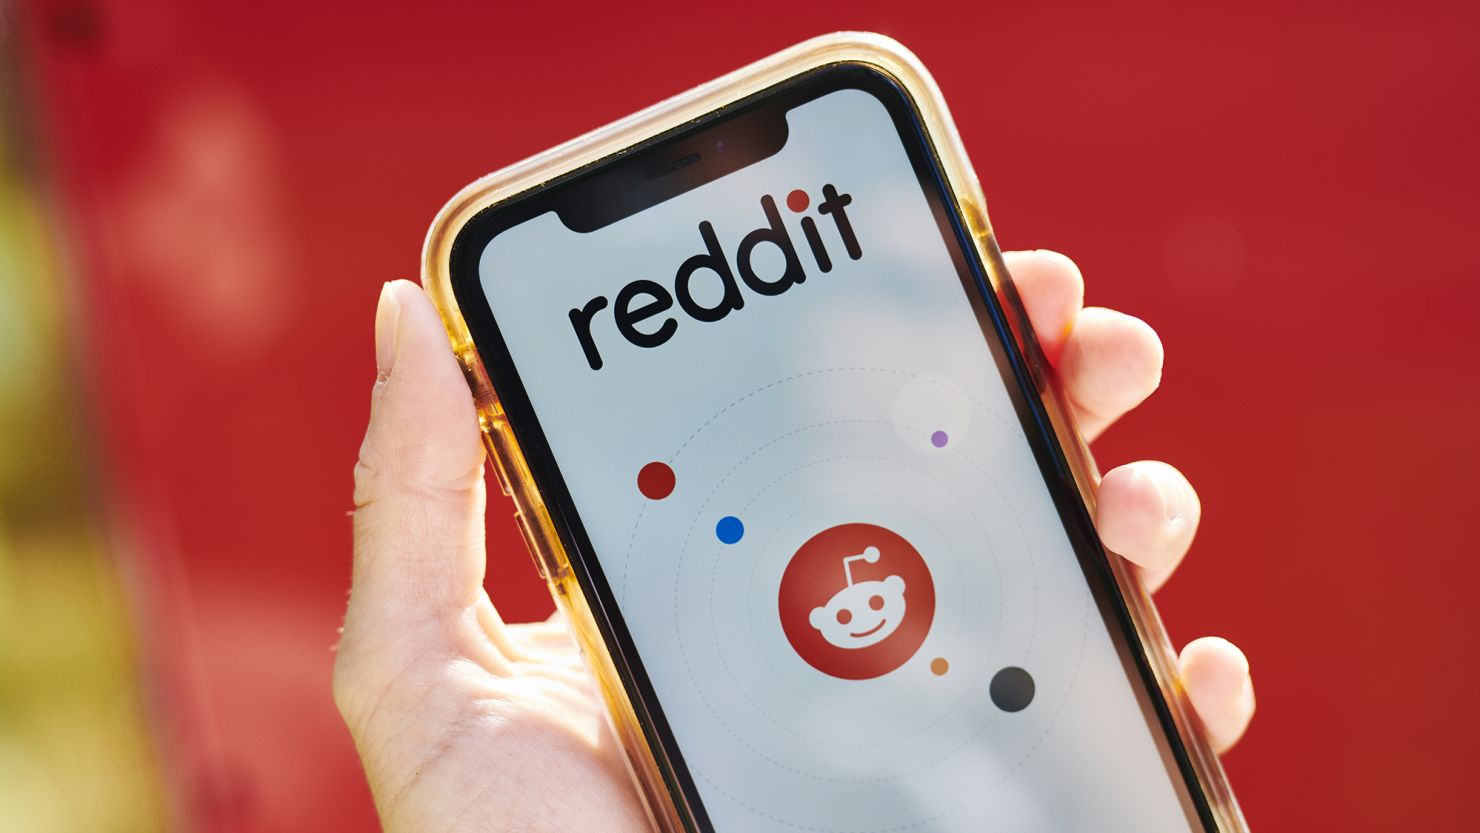 Reddit's logo displayed on a smartphone in a photograph taken in Brooklyn, New York, on Tuesday, June 30, 2020. Reddit is set to make its initial public offering this year.